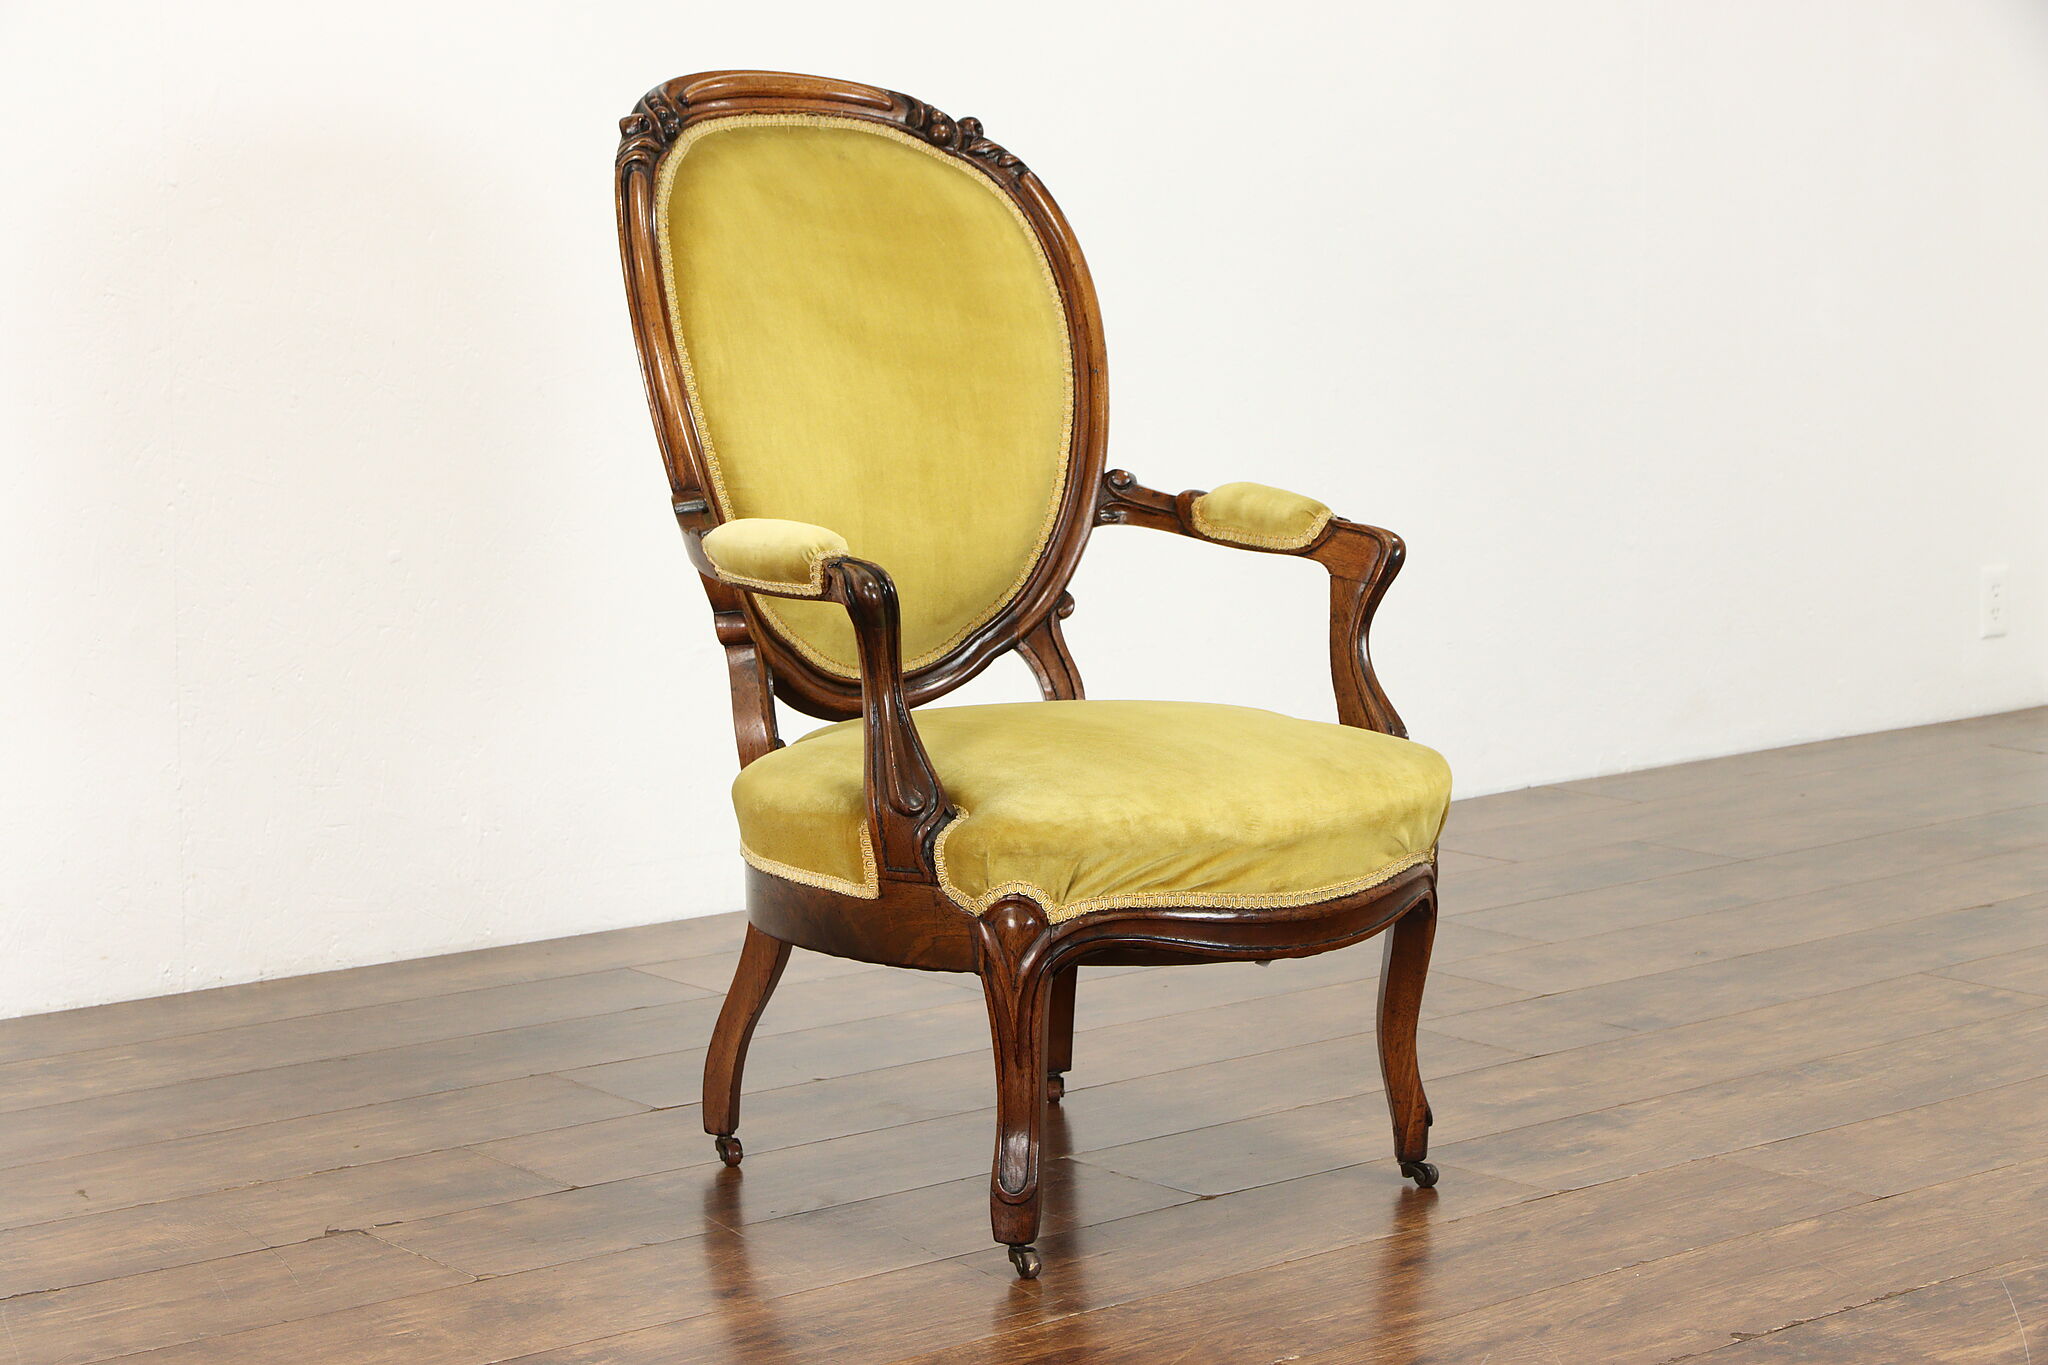 Louis French dining chair in antiqued finish and velvet